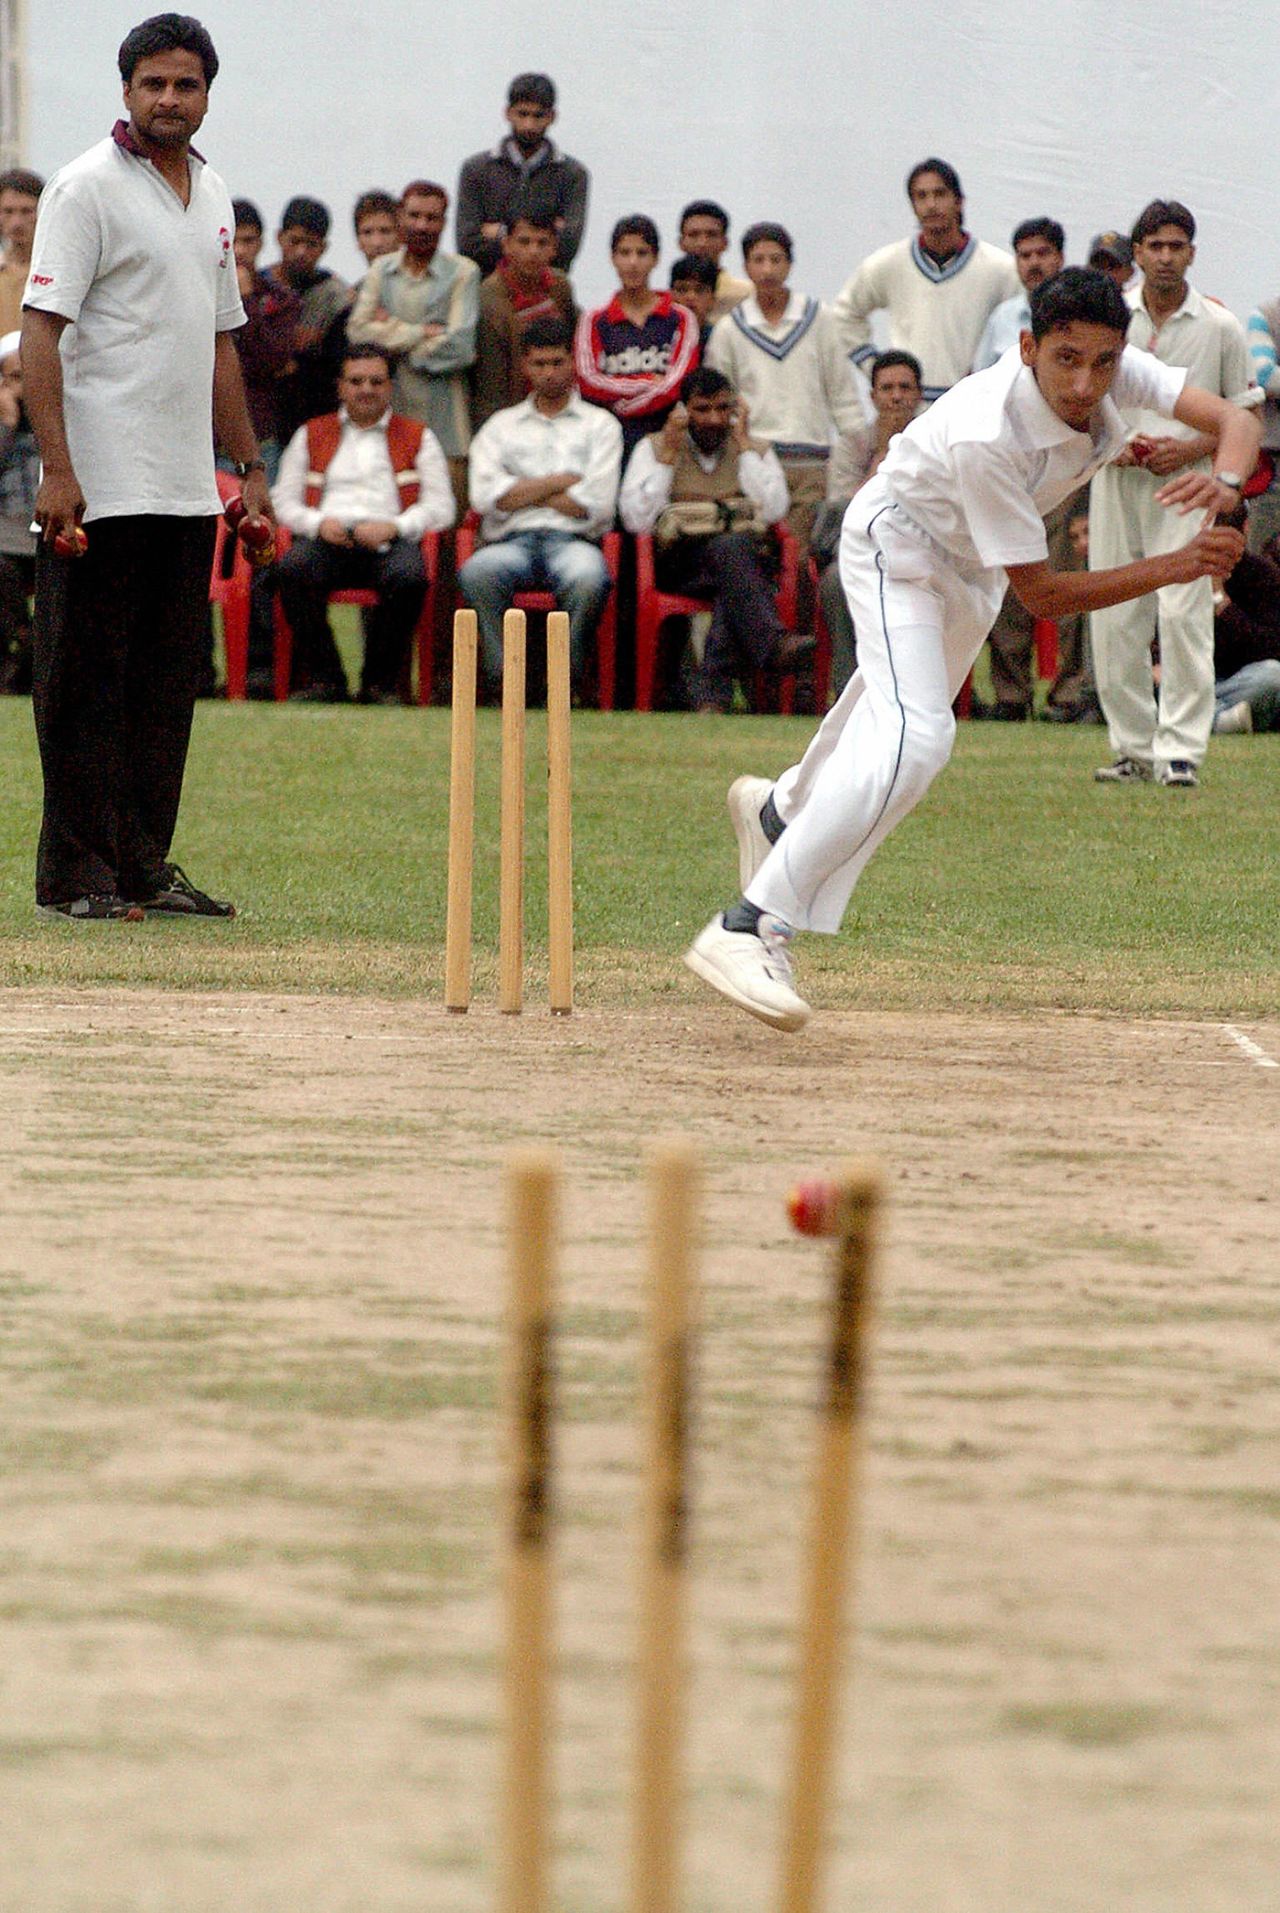 Javagal Srinath watches young bowlers at a talent-spotting event in Srinagar for the MRF Pace Foundation, May 2, 2006